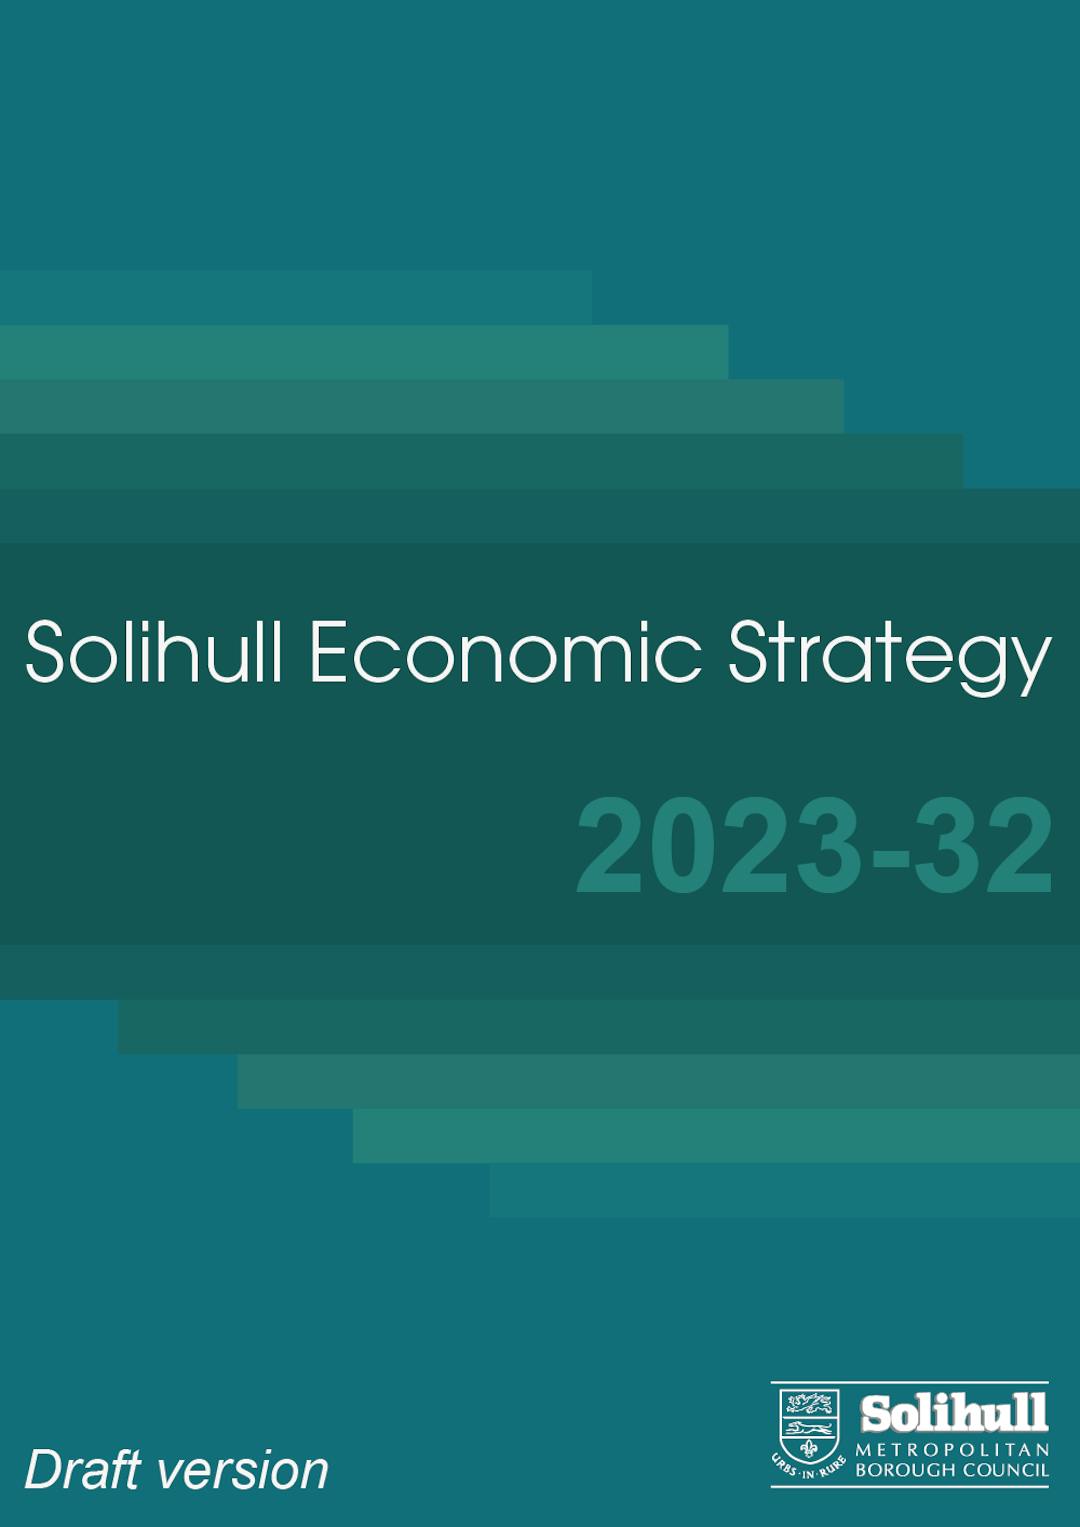 Image showing Solihull Economic Strategy document front cover